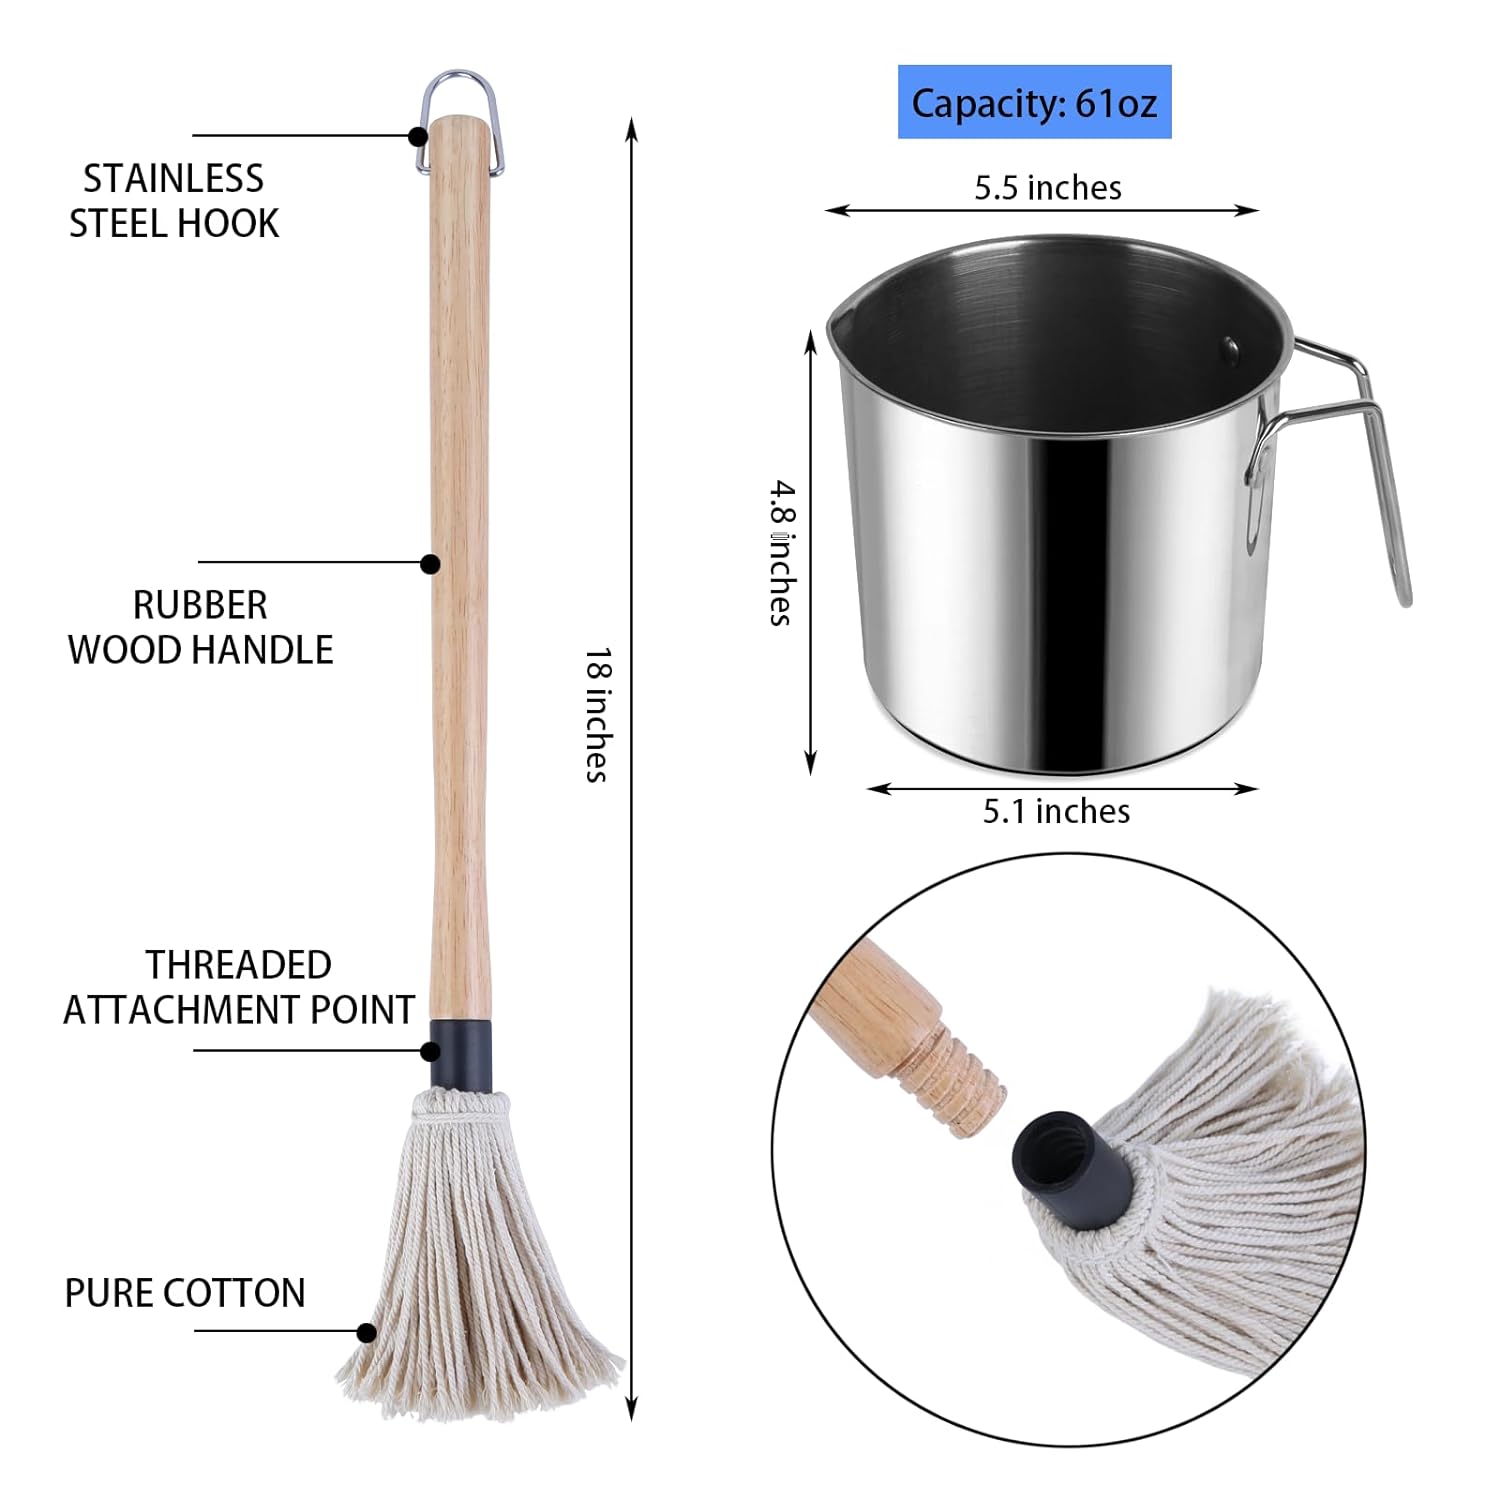 Great Choice Products Bbq Sauce Pot And Basting Brush Set, 61Oz Stainless Steel Sauce Pan & Basting Mop Brush, Gifts For Griller & Barbecue Cook